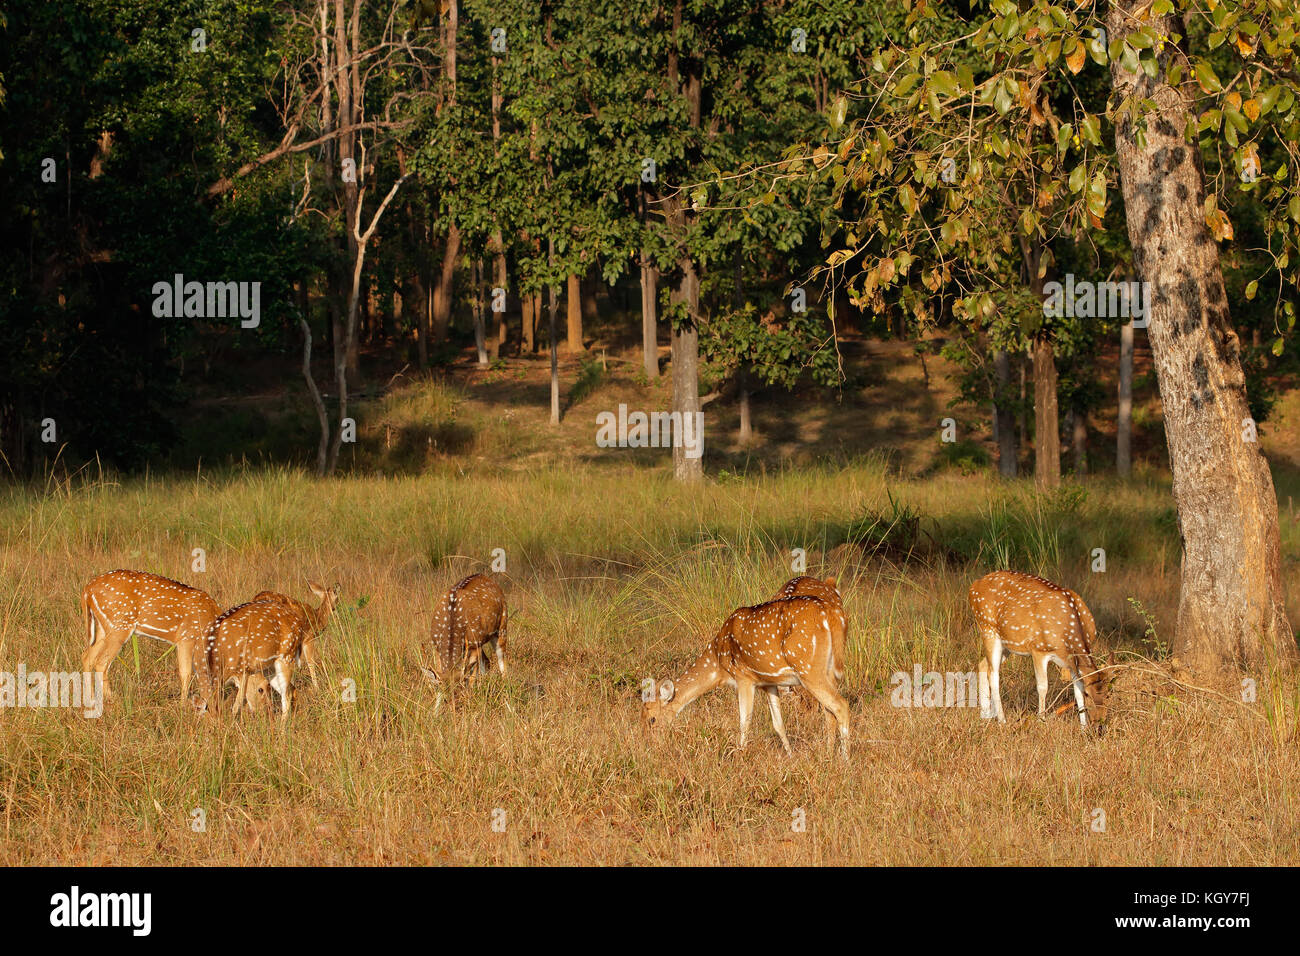 Group of spotted deer (Axis axis) in natural habitat, Kanha National Park, India Stock Photo